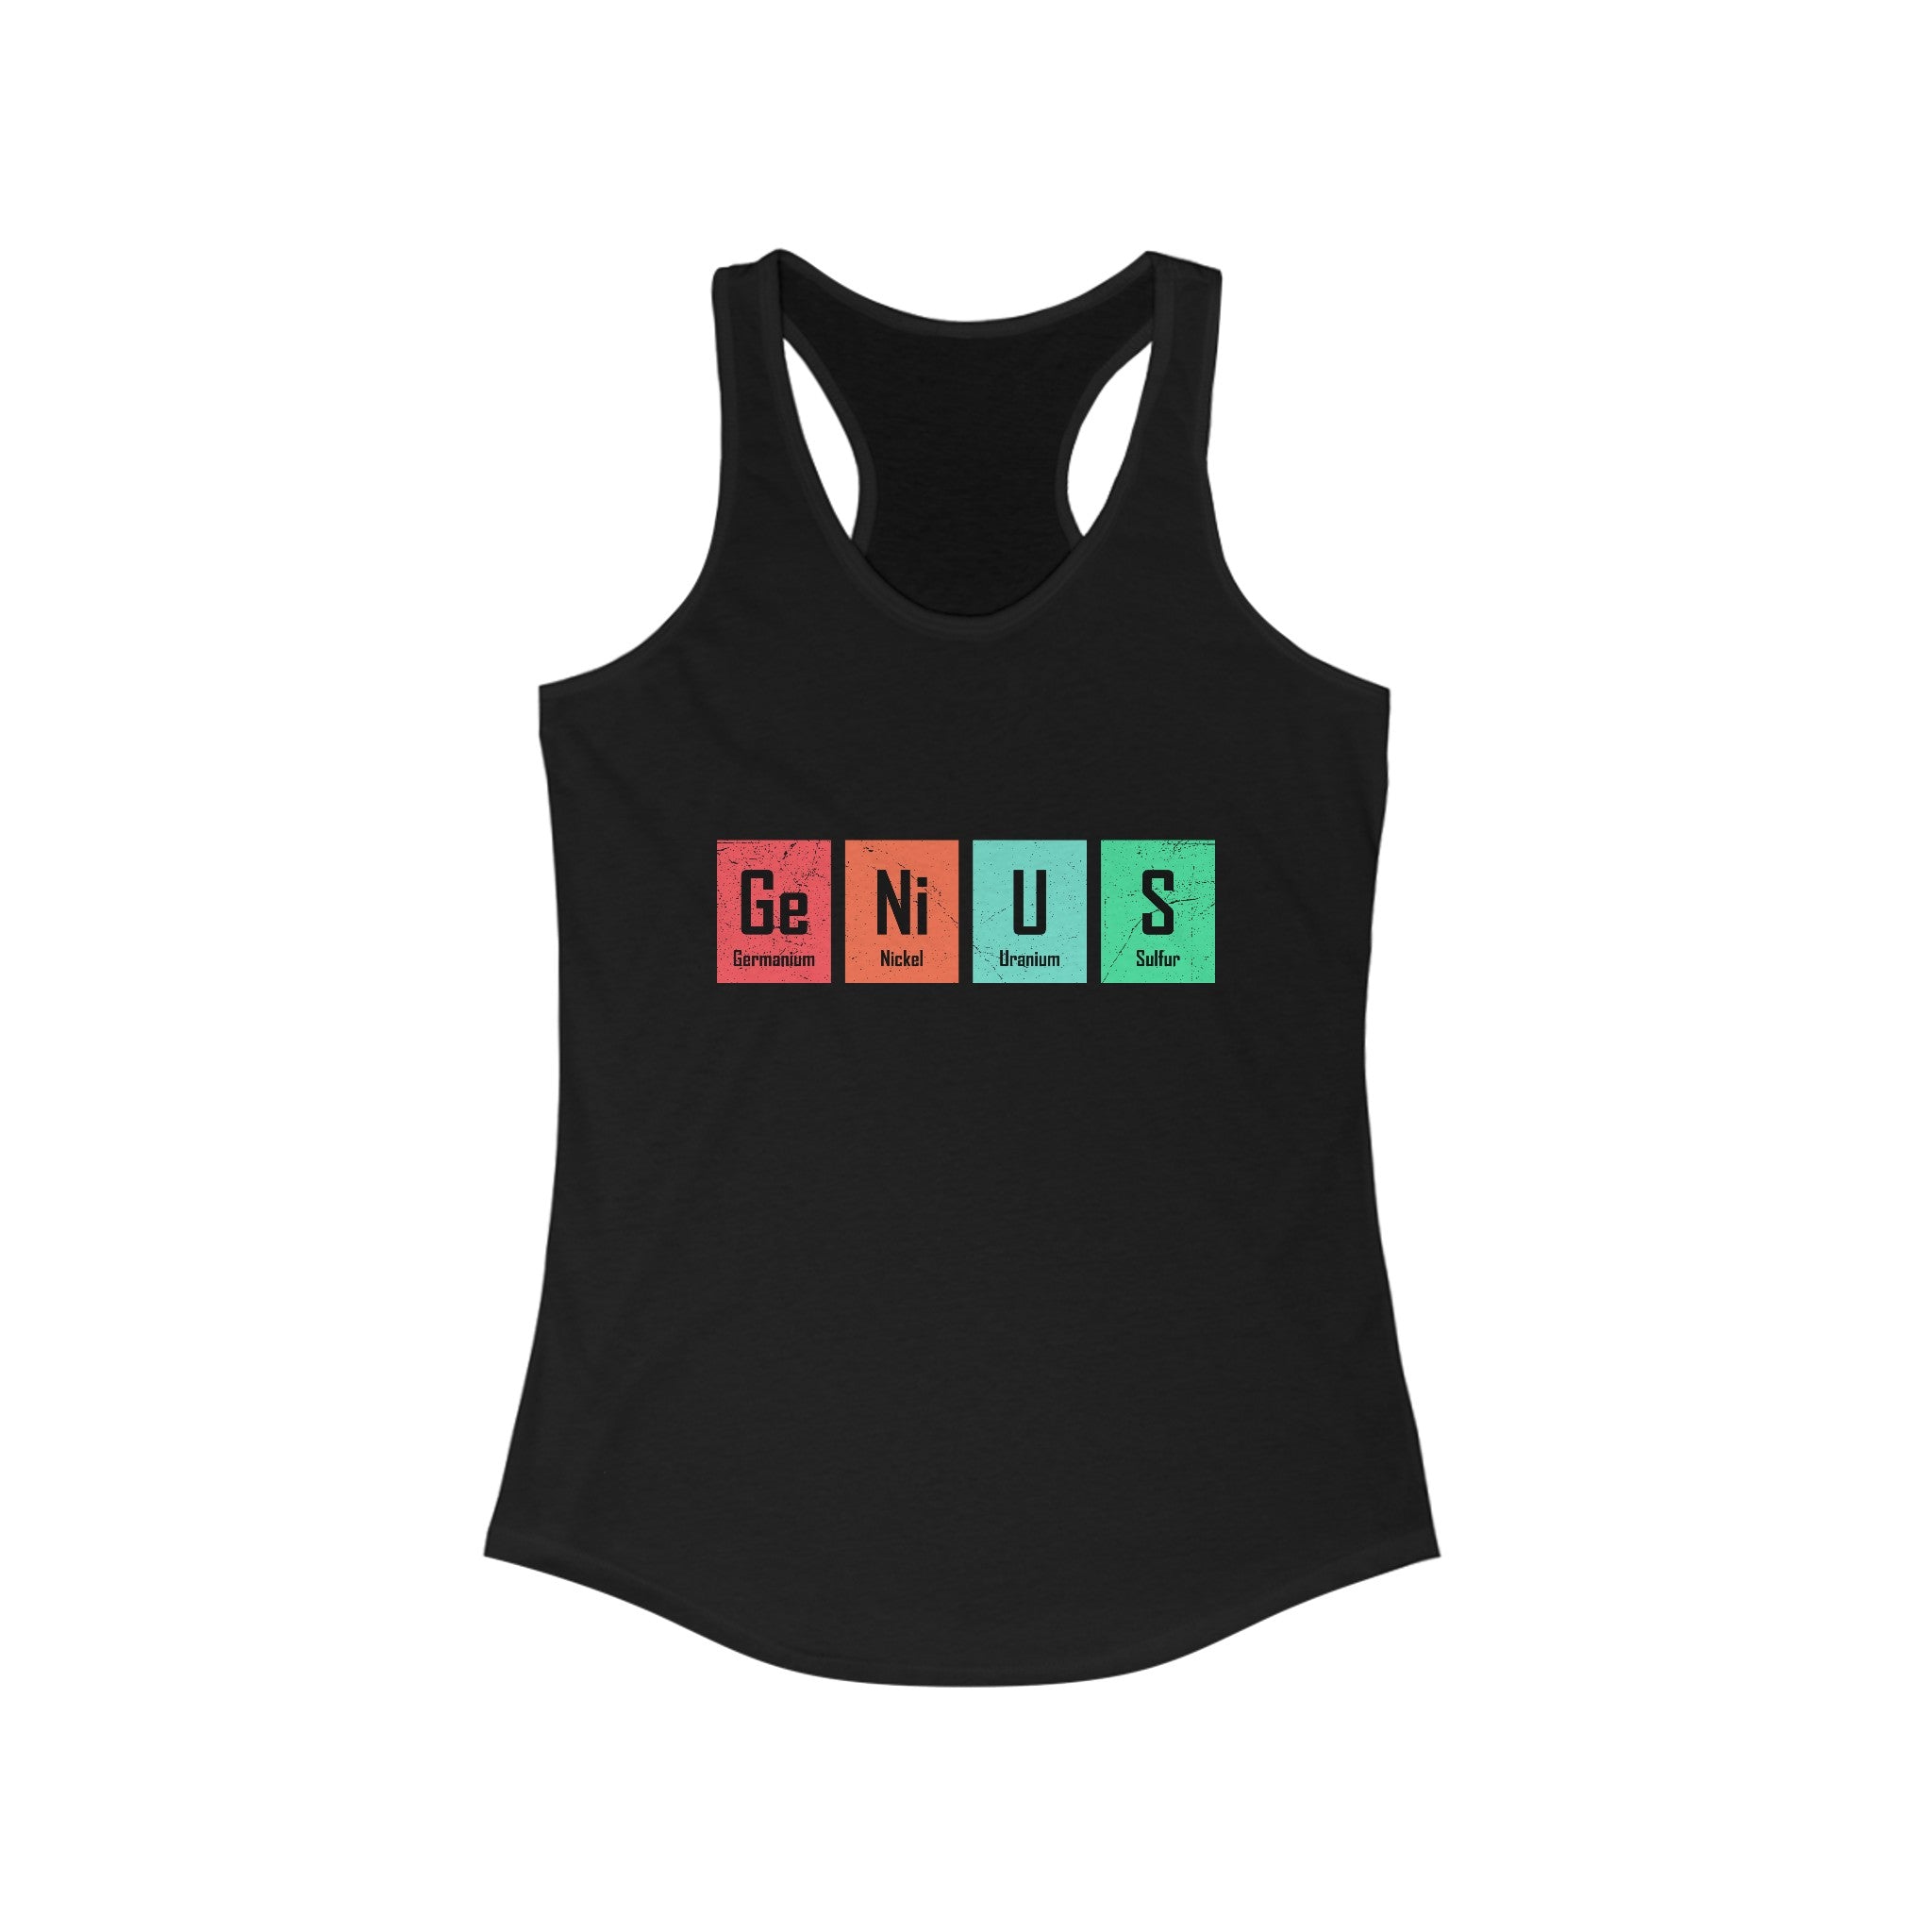 A women's racerback tank, this lightweight workout essential features the word "Genius" spelled using chemical element symbols: Germanium (Ge), Nickel (Ni), Uranium (U), and Sulfur (S). Perfect for an active lifestyle! Introducing the Ge-Ni-U-S - Women's Racerback Tank.